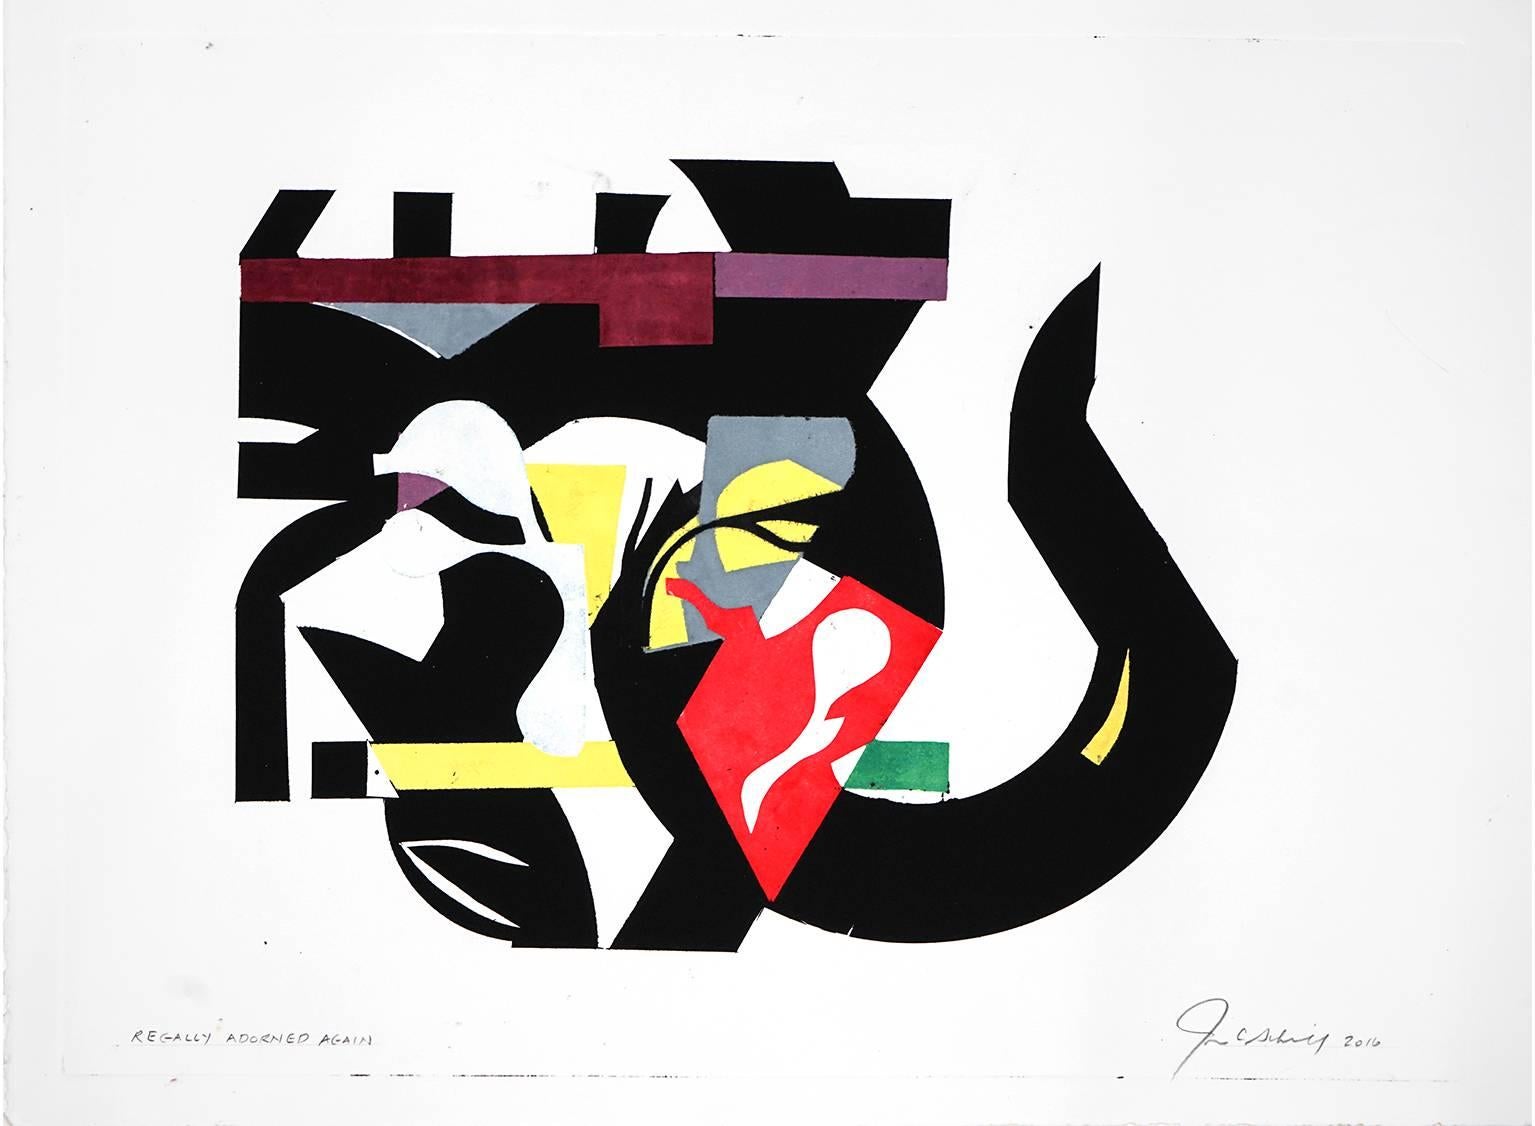 John Schiff Abstract Print - "Regally Adorned Again", abstract Modernist monoprint, black, red, yellow.